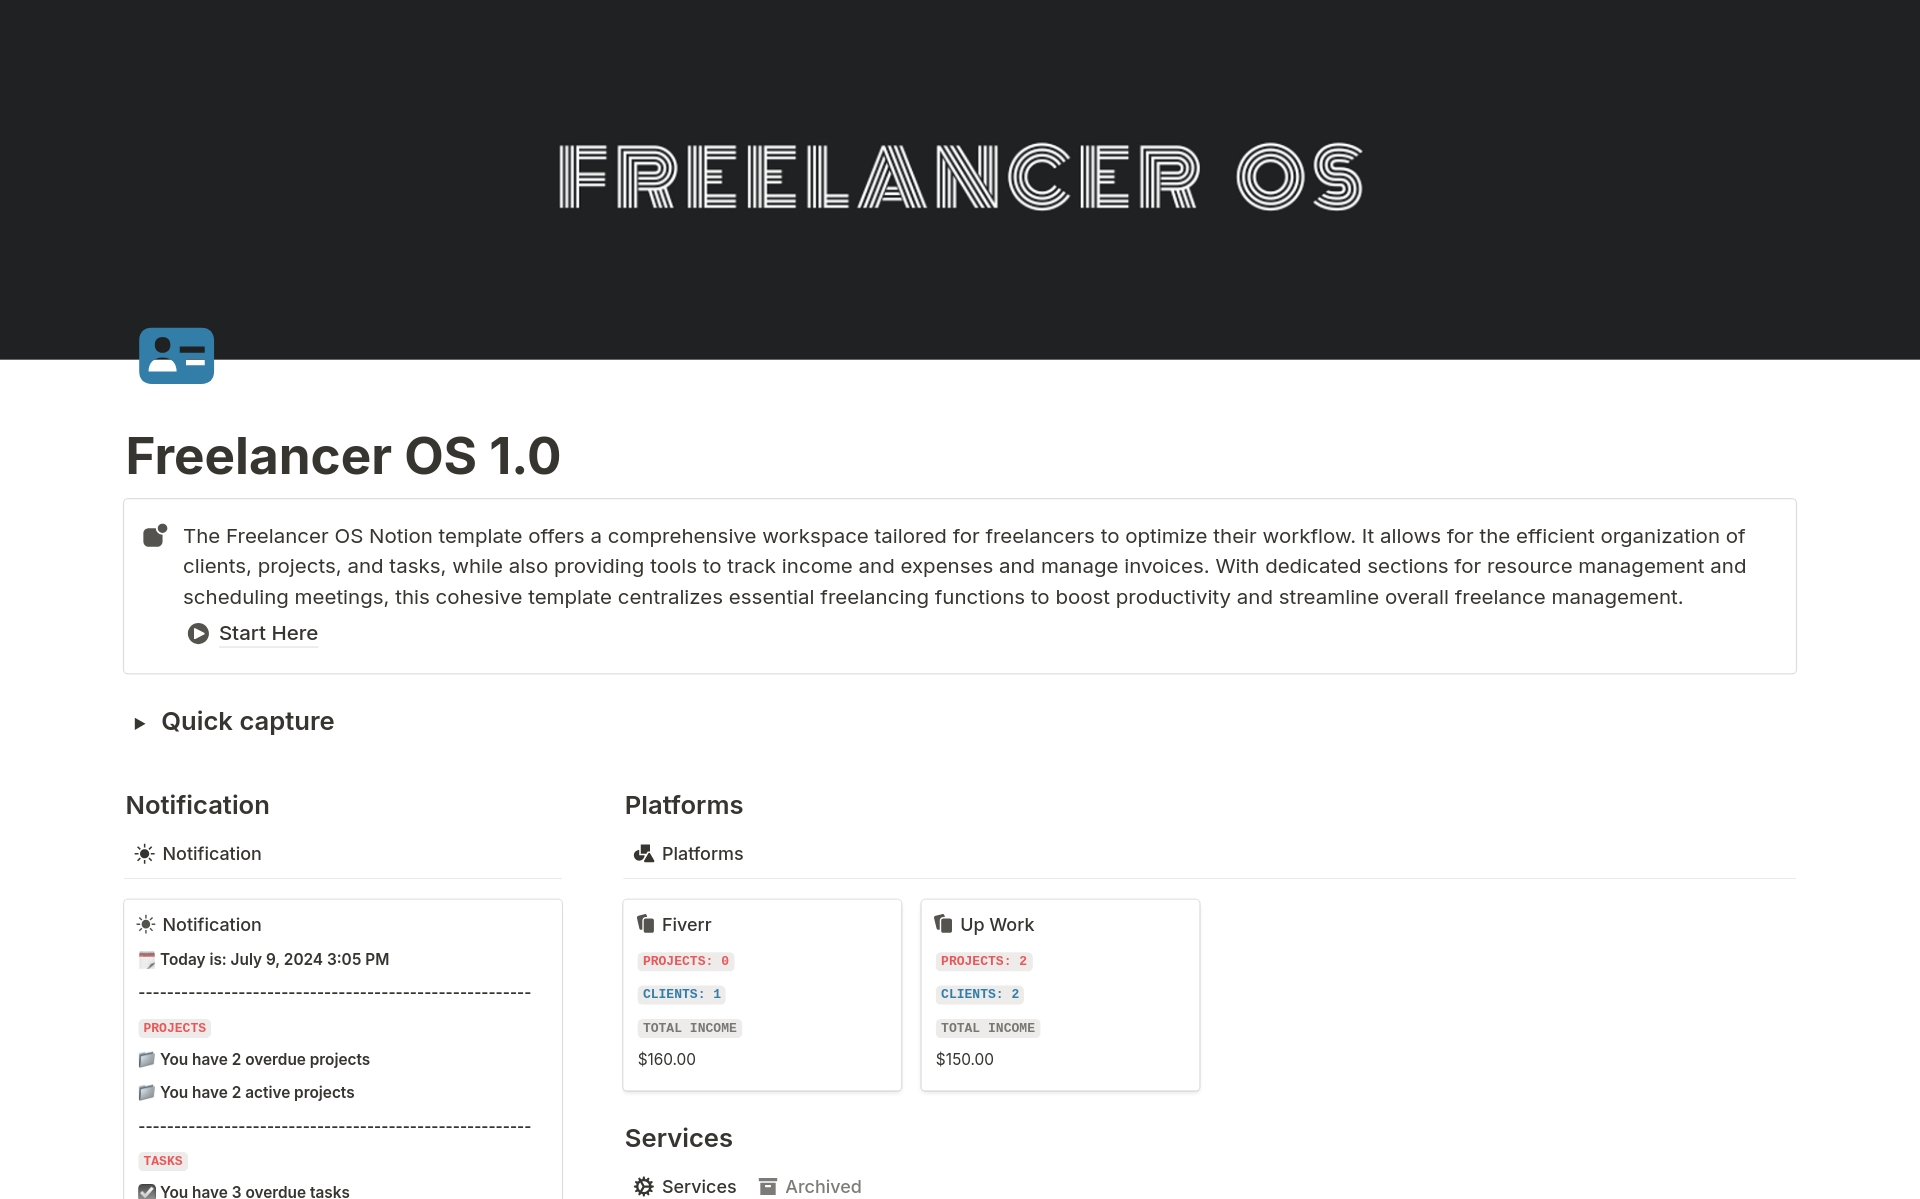 Freelancer OS notion template allows for the efficient organization of clients, projects, and tasks, while also providing tools to track income and expenses and manage invoices. 